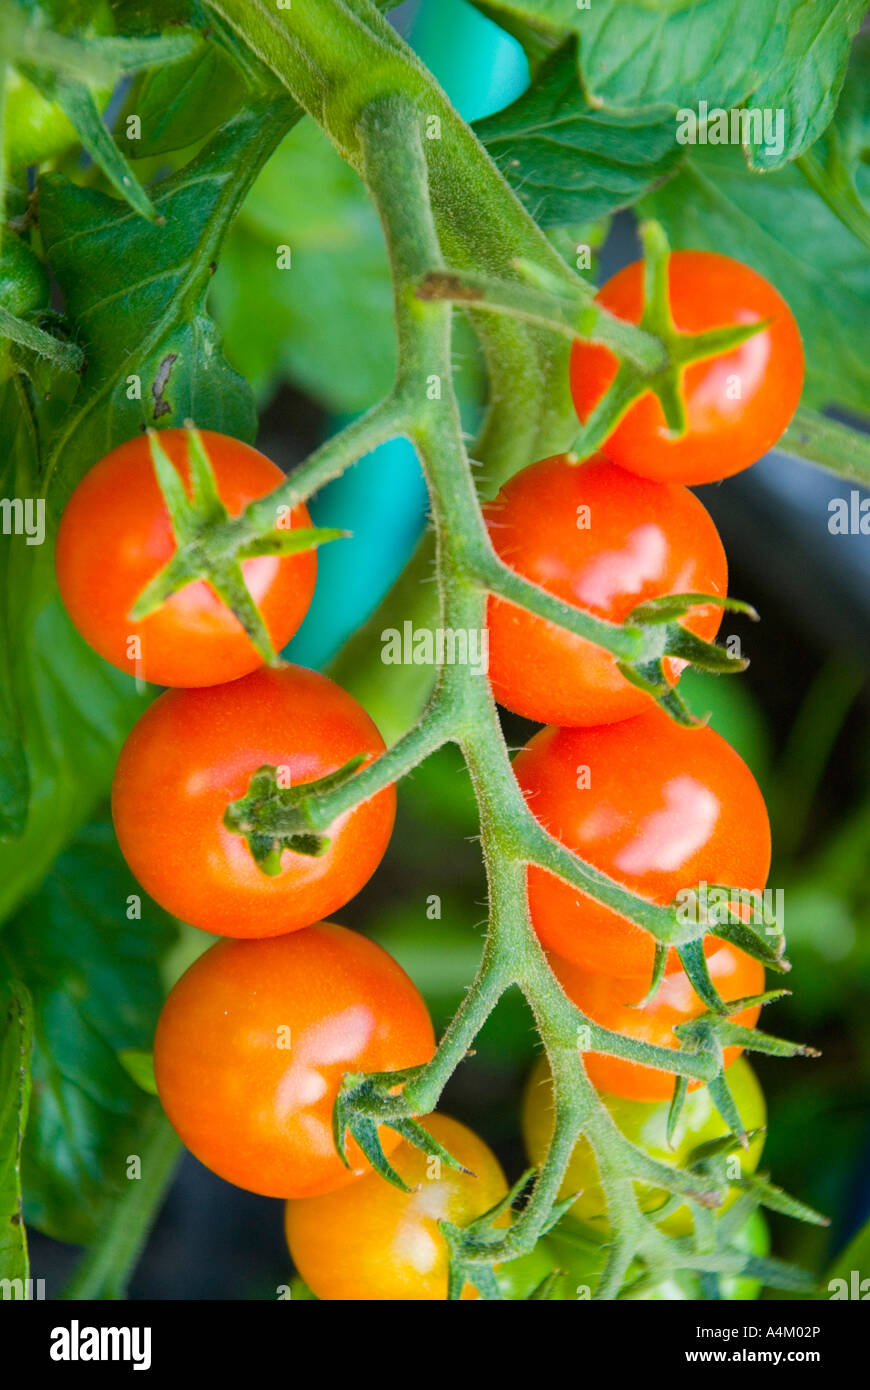 A cluster of Sweet Bite tomatoes ripening on the vine Stock Photo